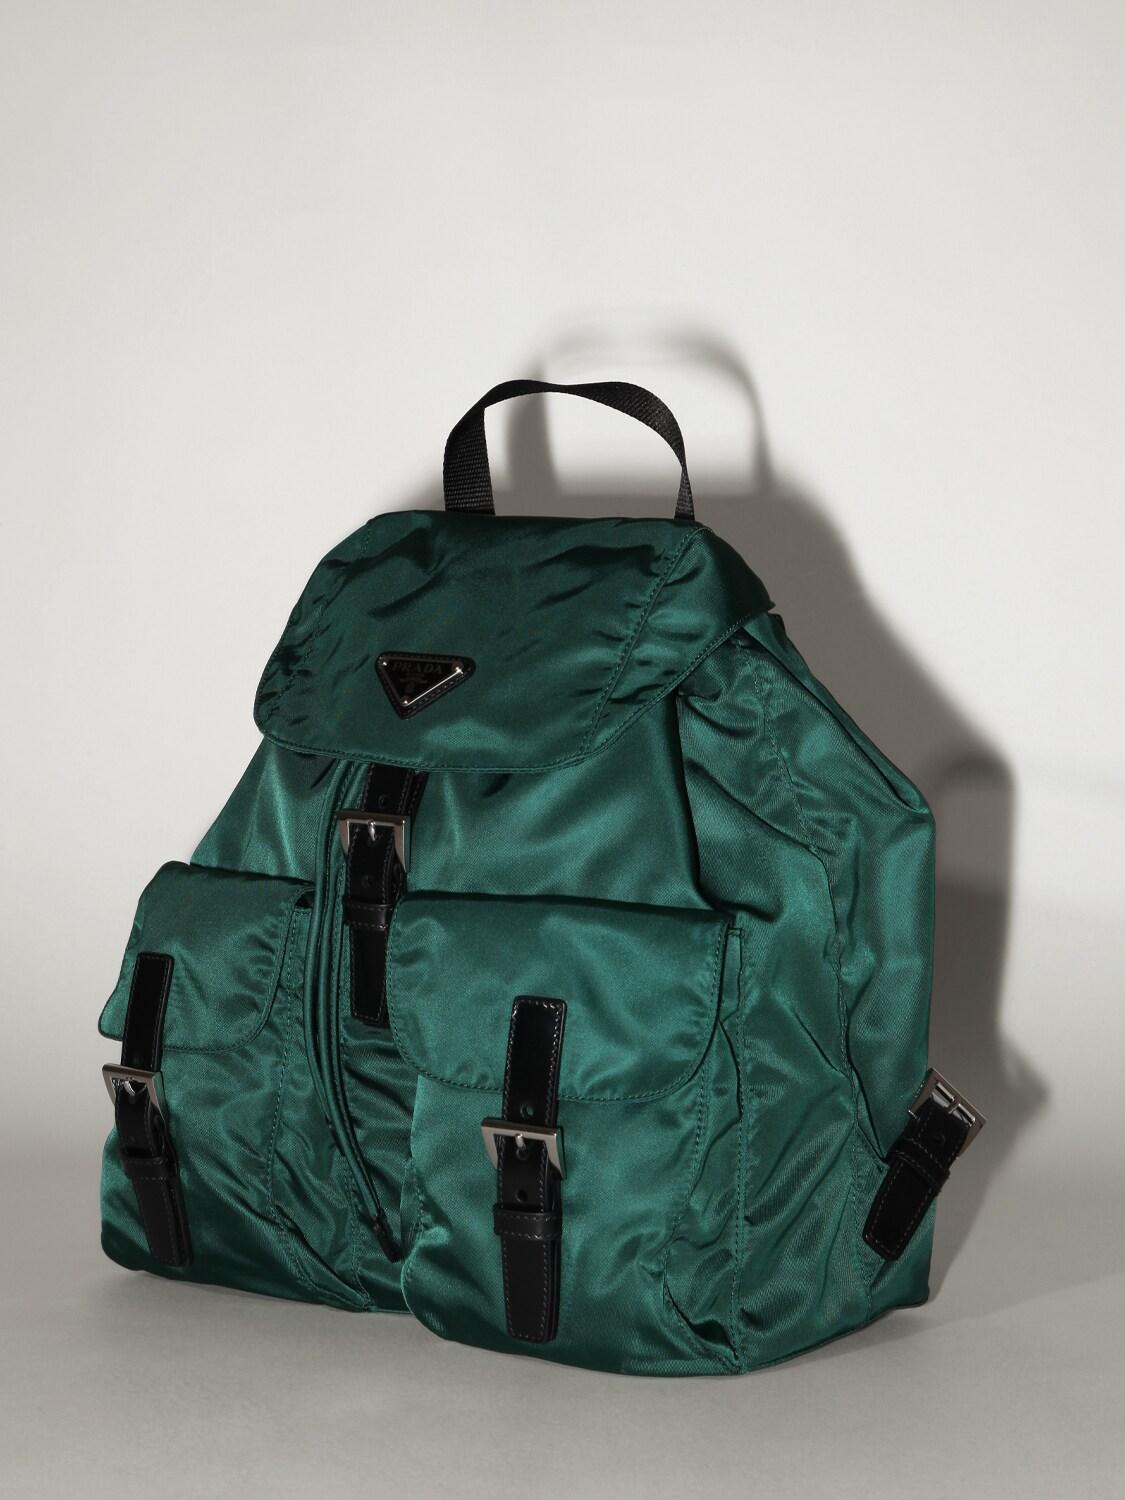 Prada Synthetic Lvr Exclusive Nylon Canvas Backpack in Green | Lyst